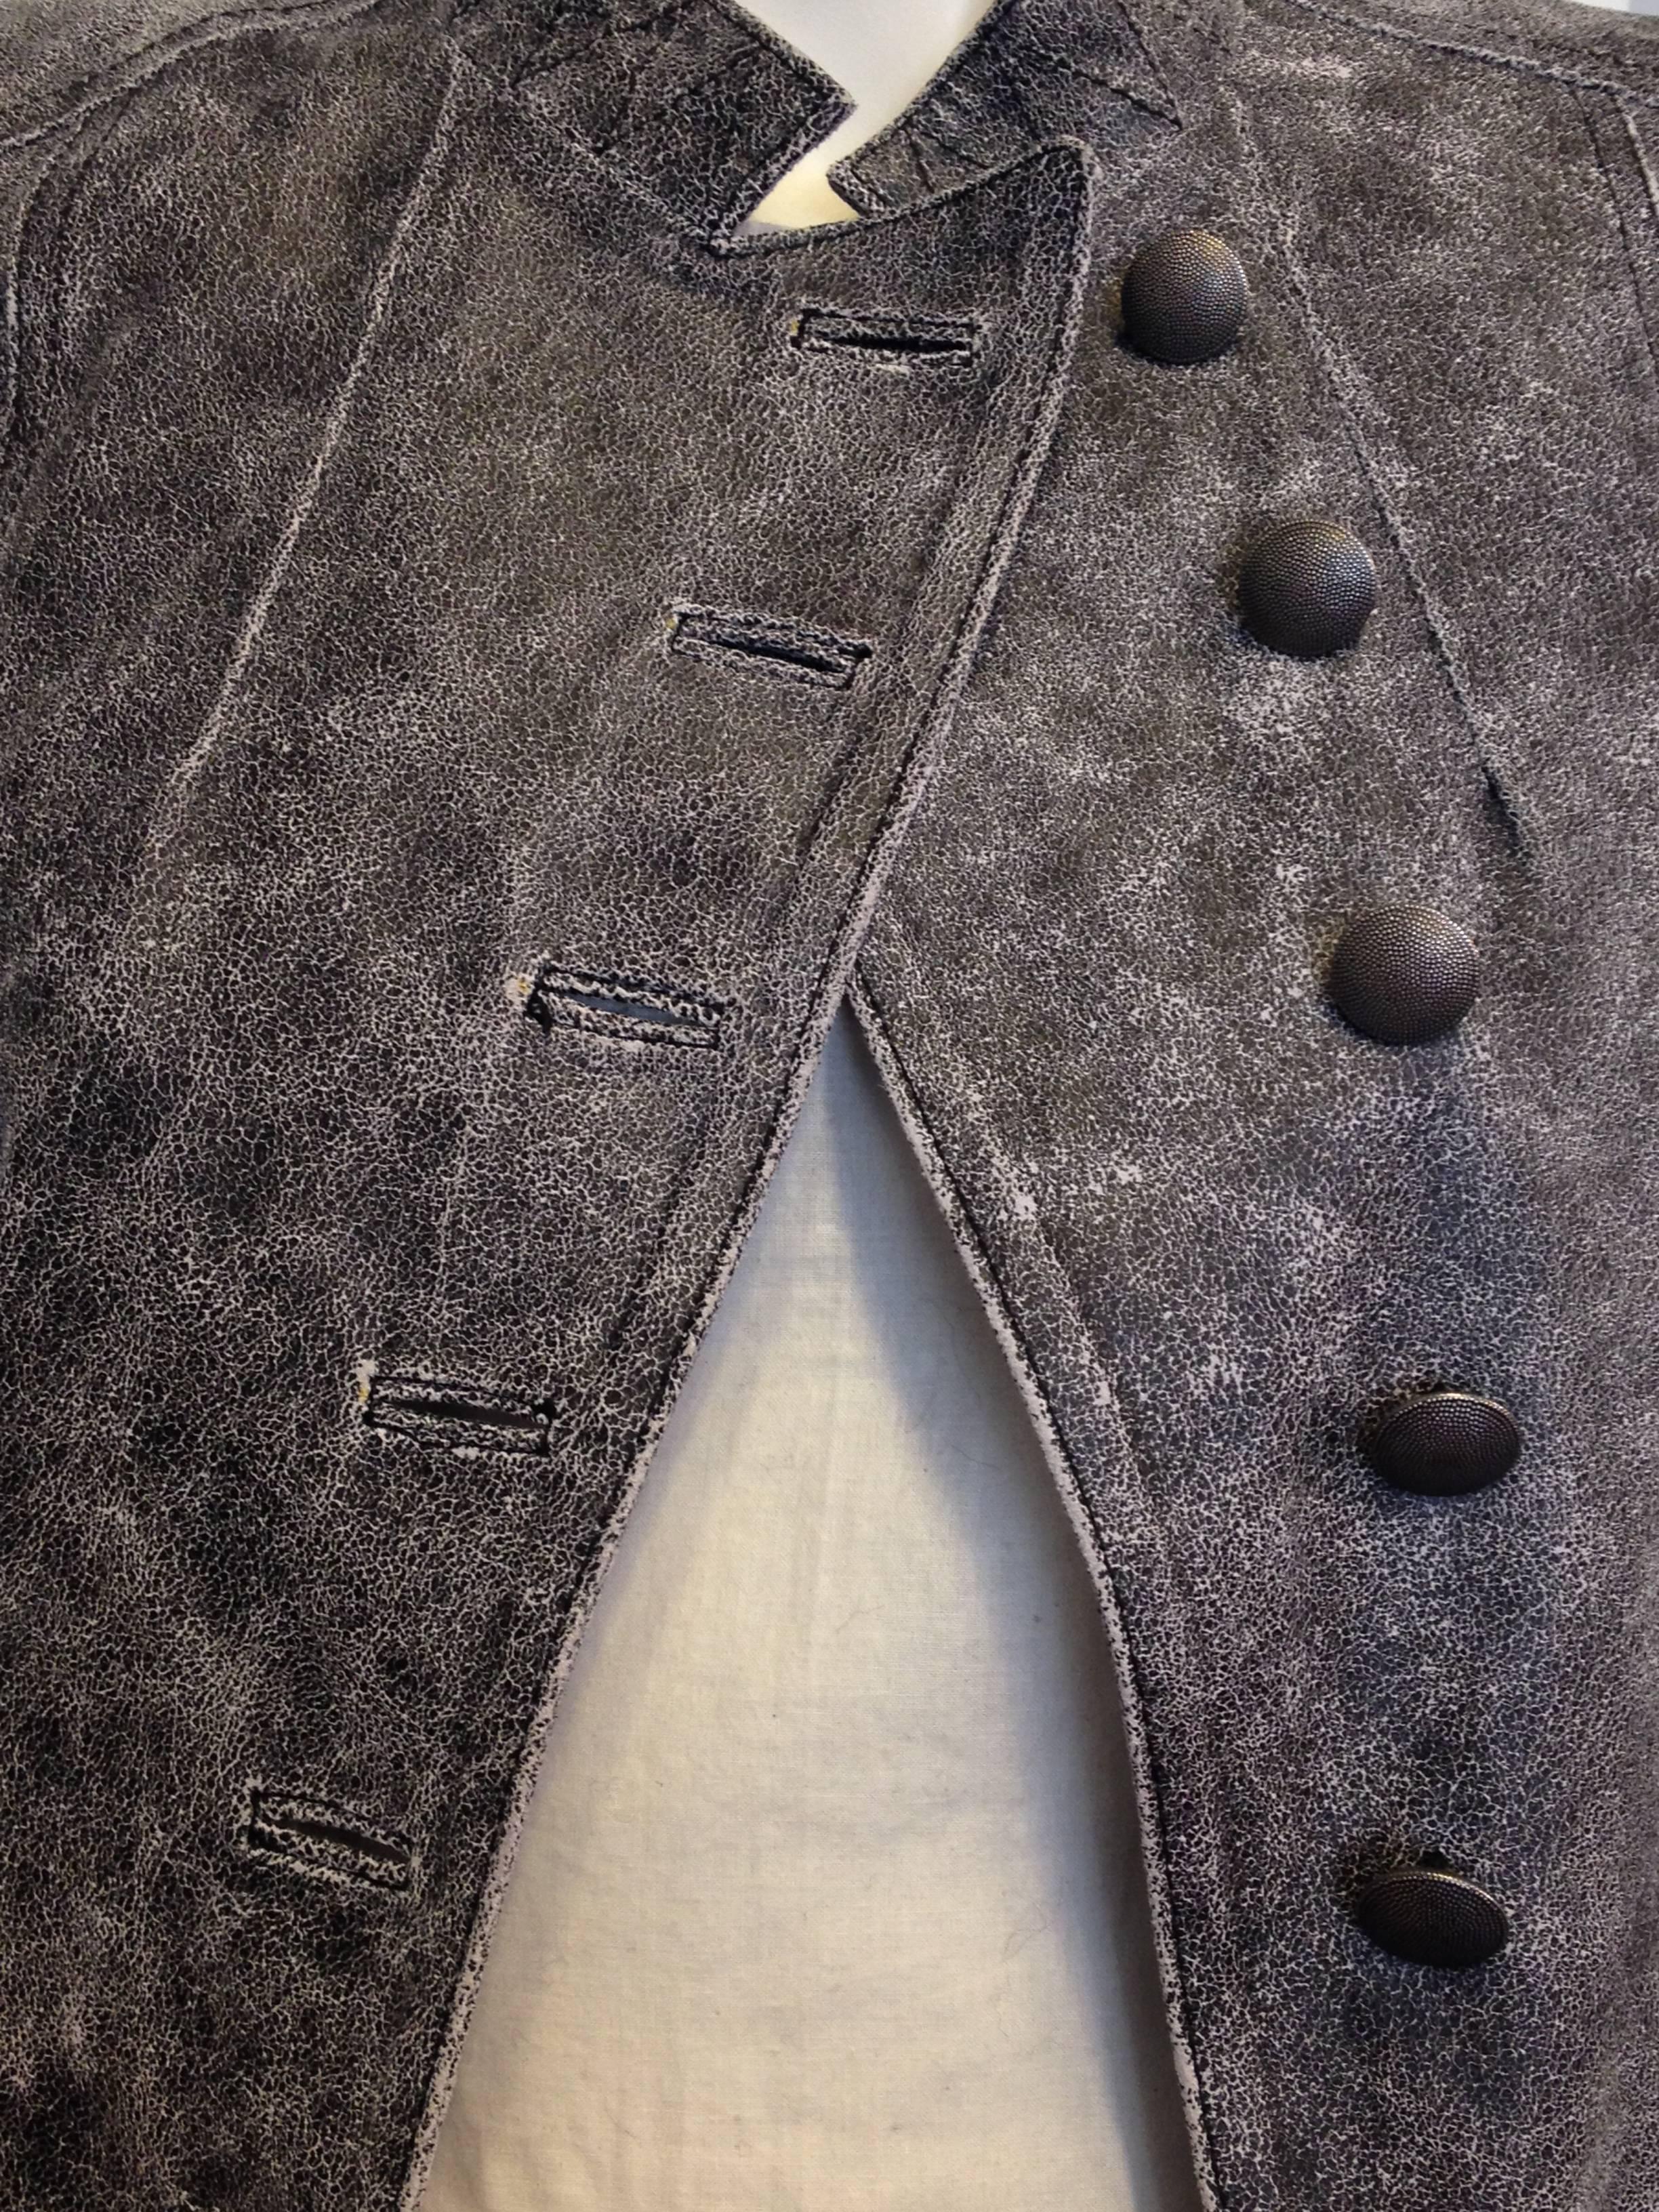 Ann Demeulemeester Grey Distressed Leather Jacket 1